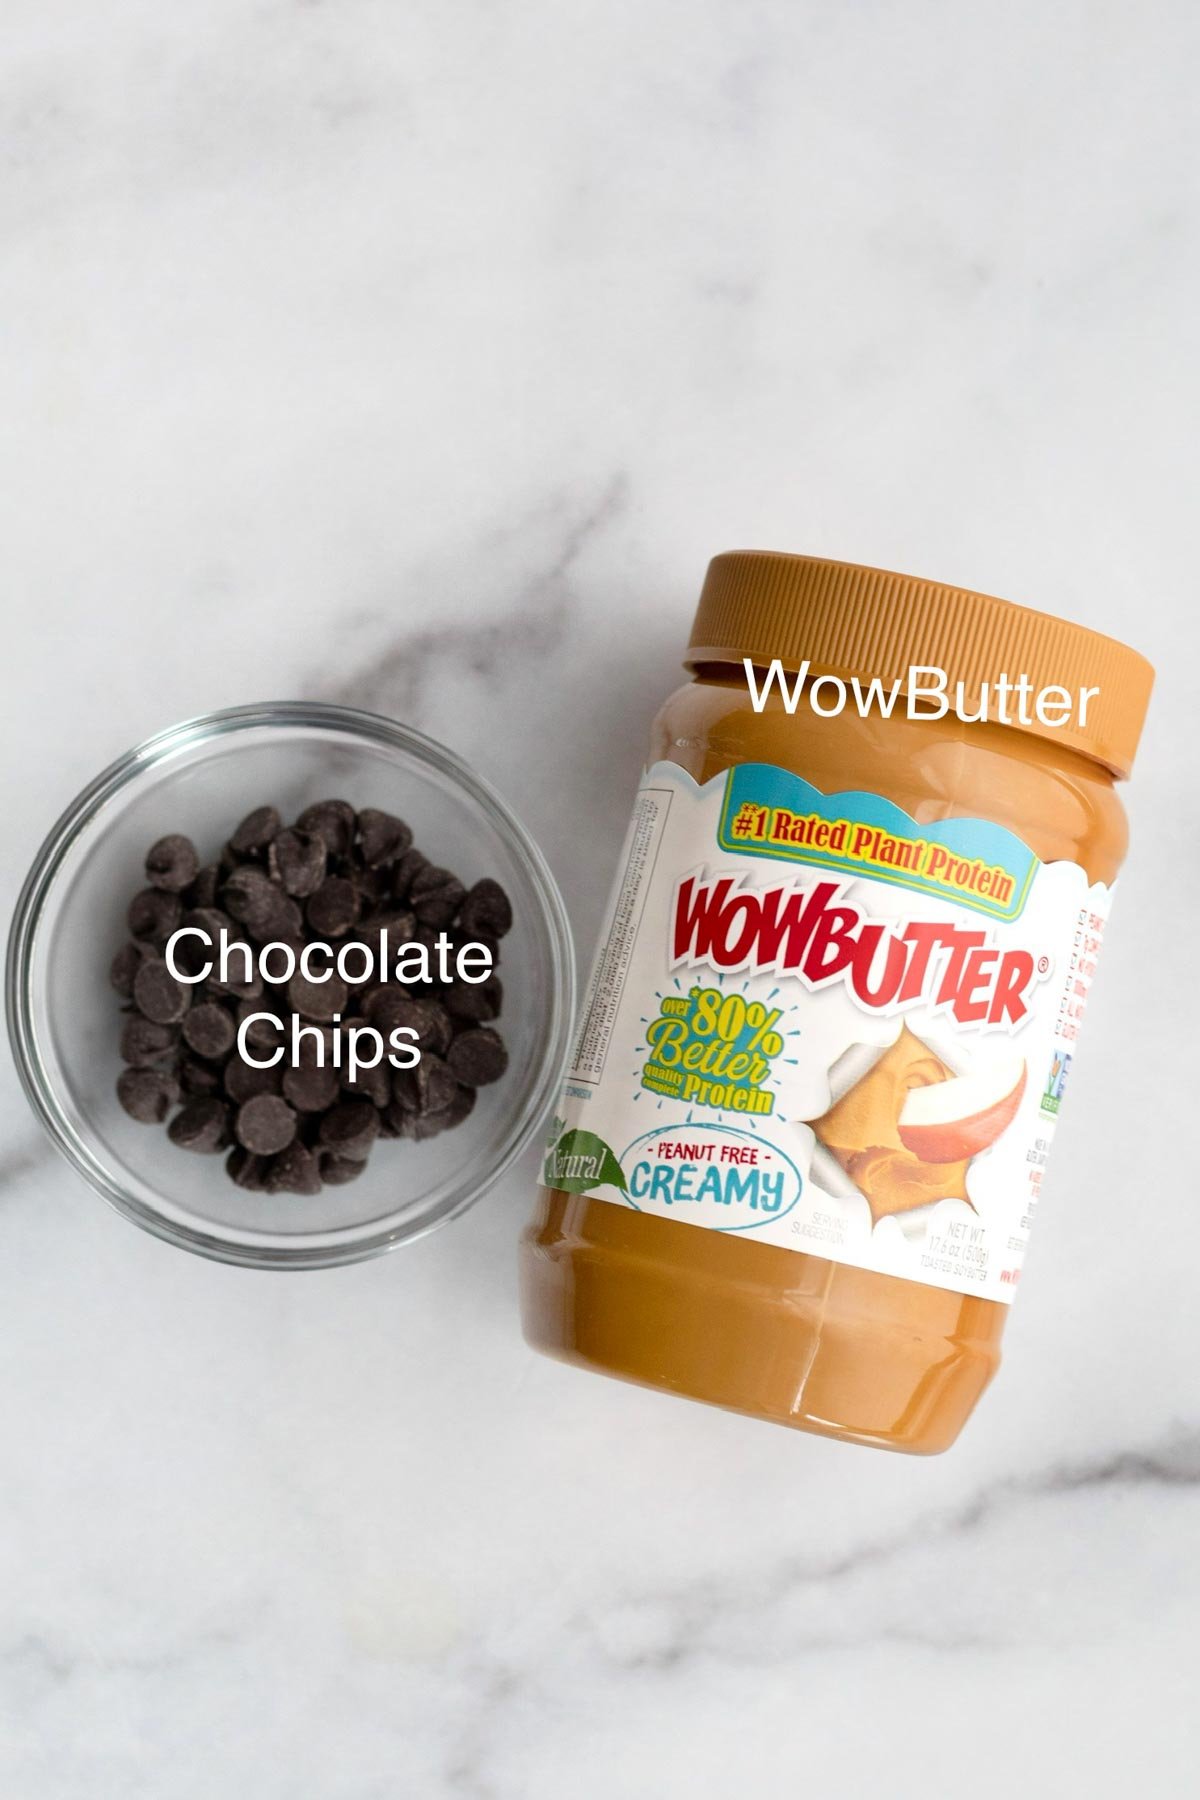 Chocolate chips in a glass bowl and a container of Wow Butter.